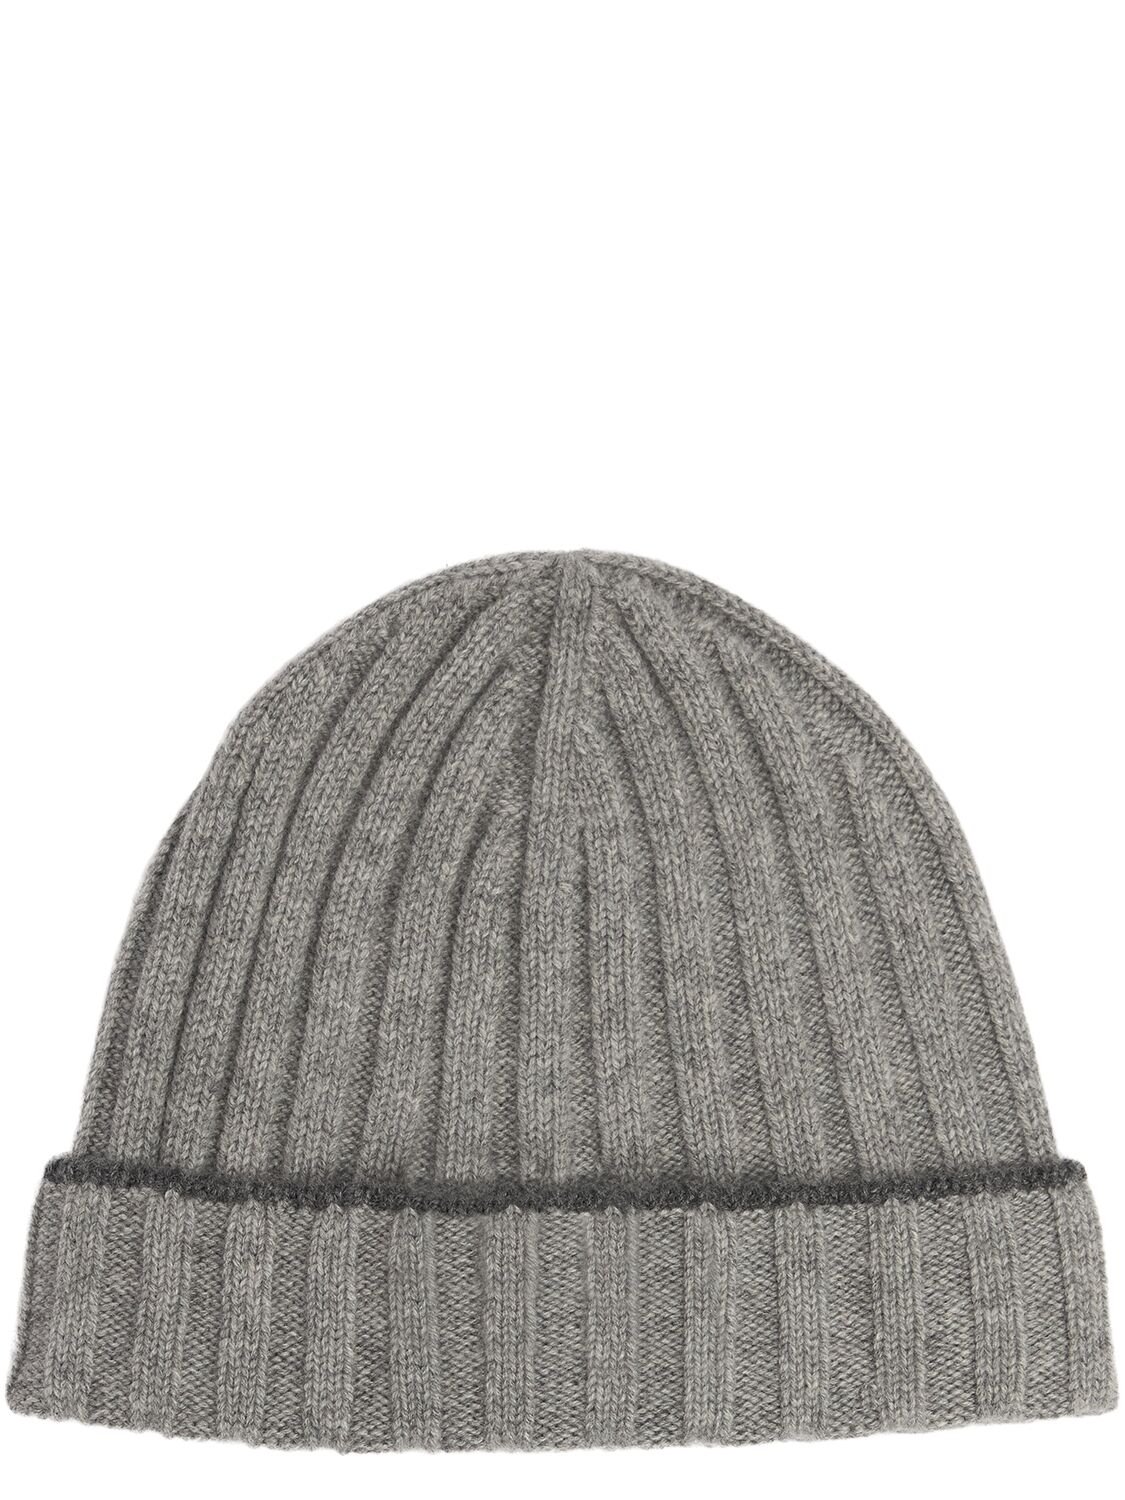 Brunello Cucinelli Cashmere Ribbed Knit Beanie Hat In Grey